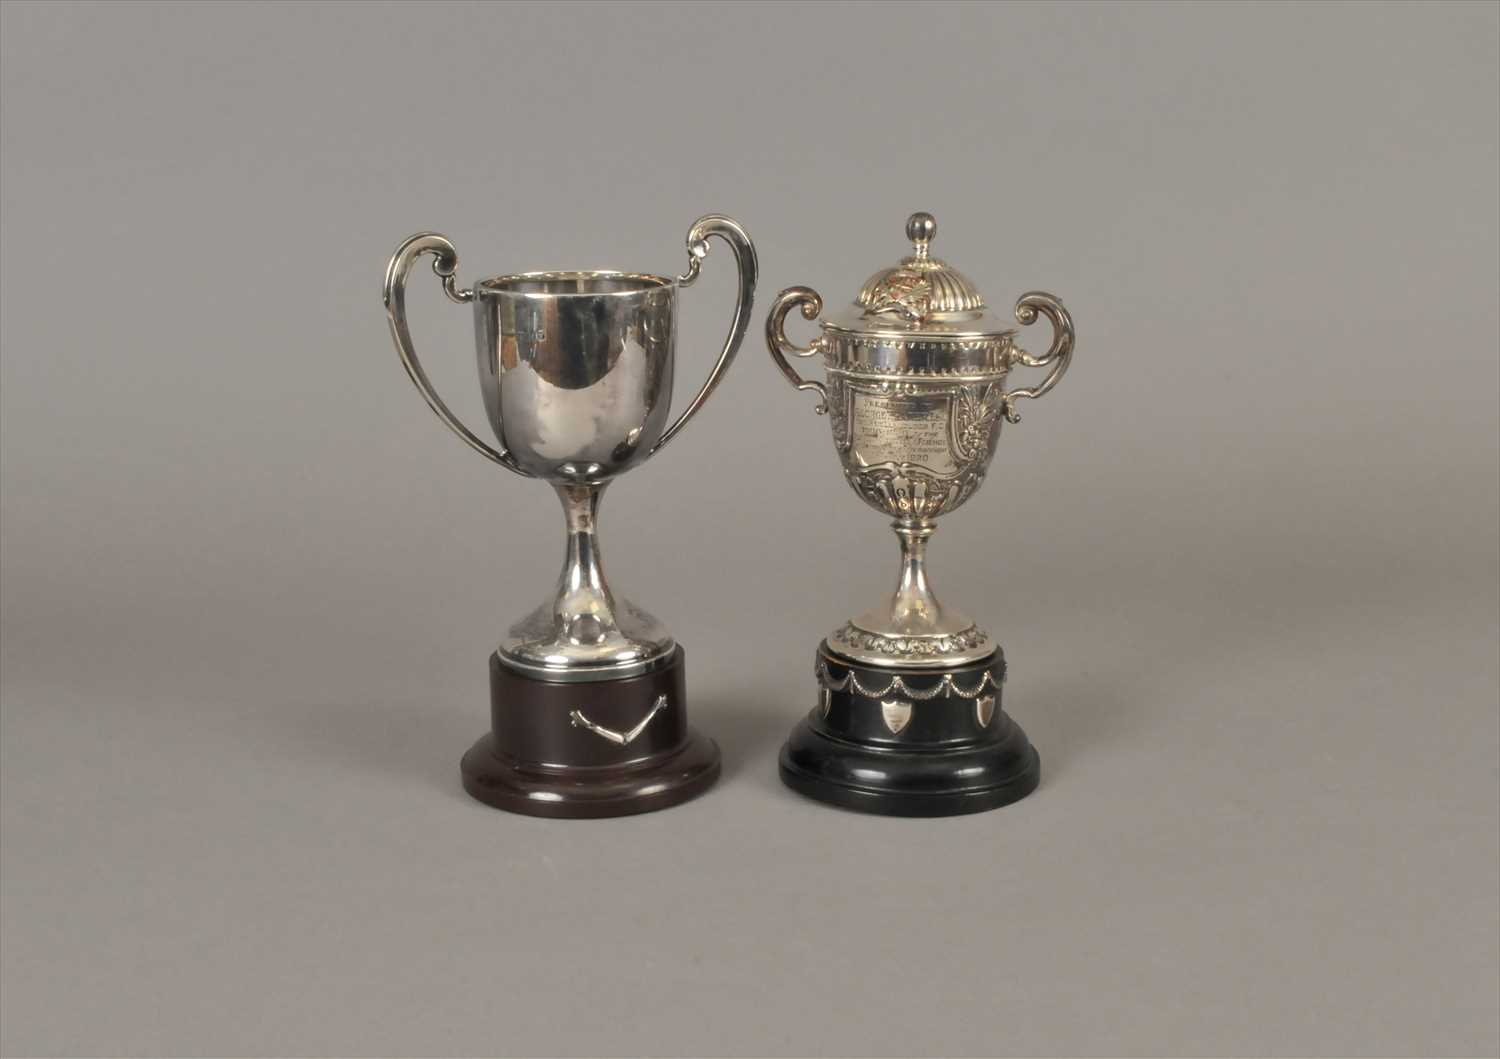 Lot 22 - Two presentation trophy cups